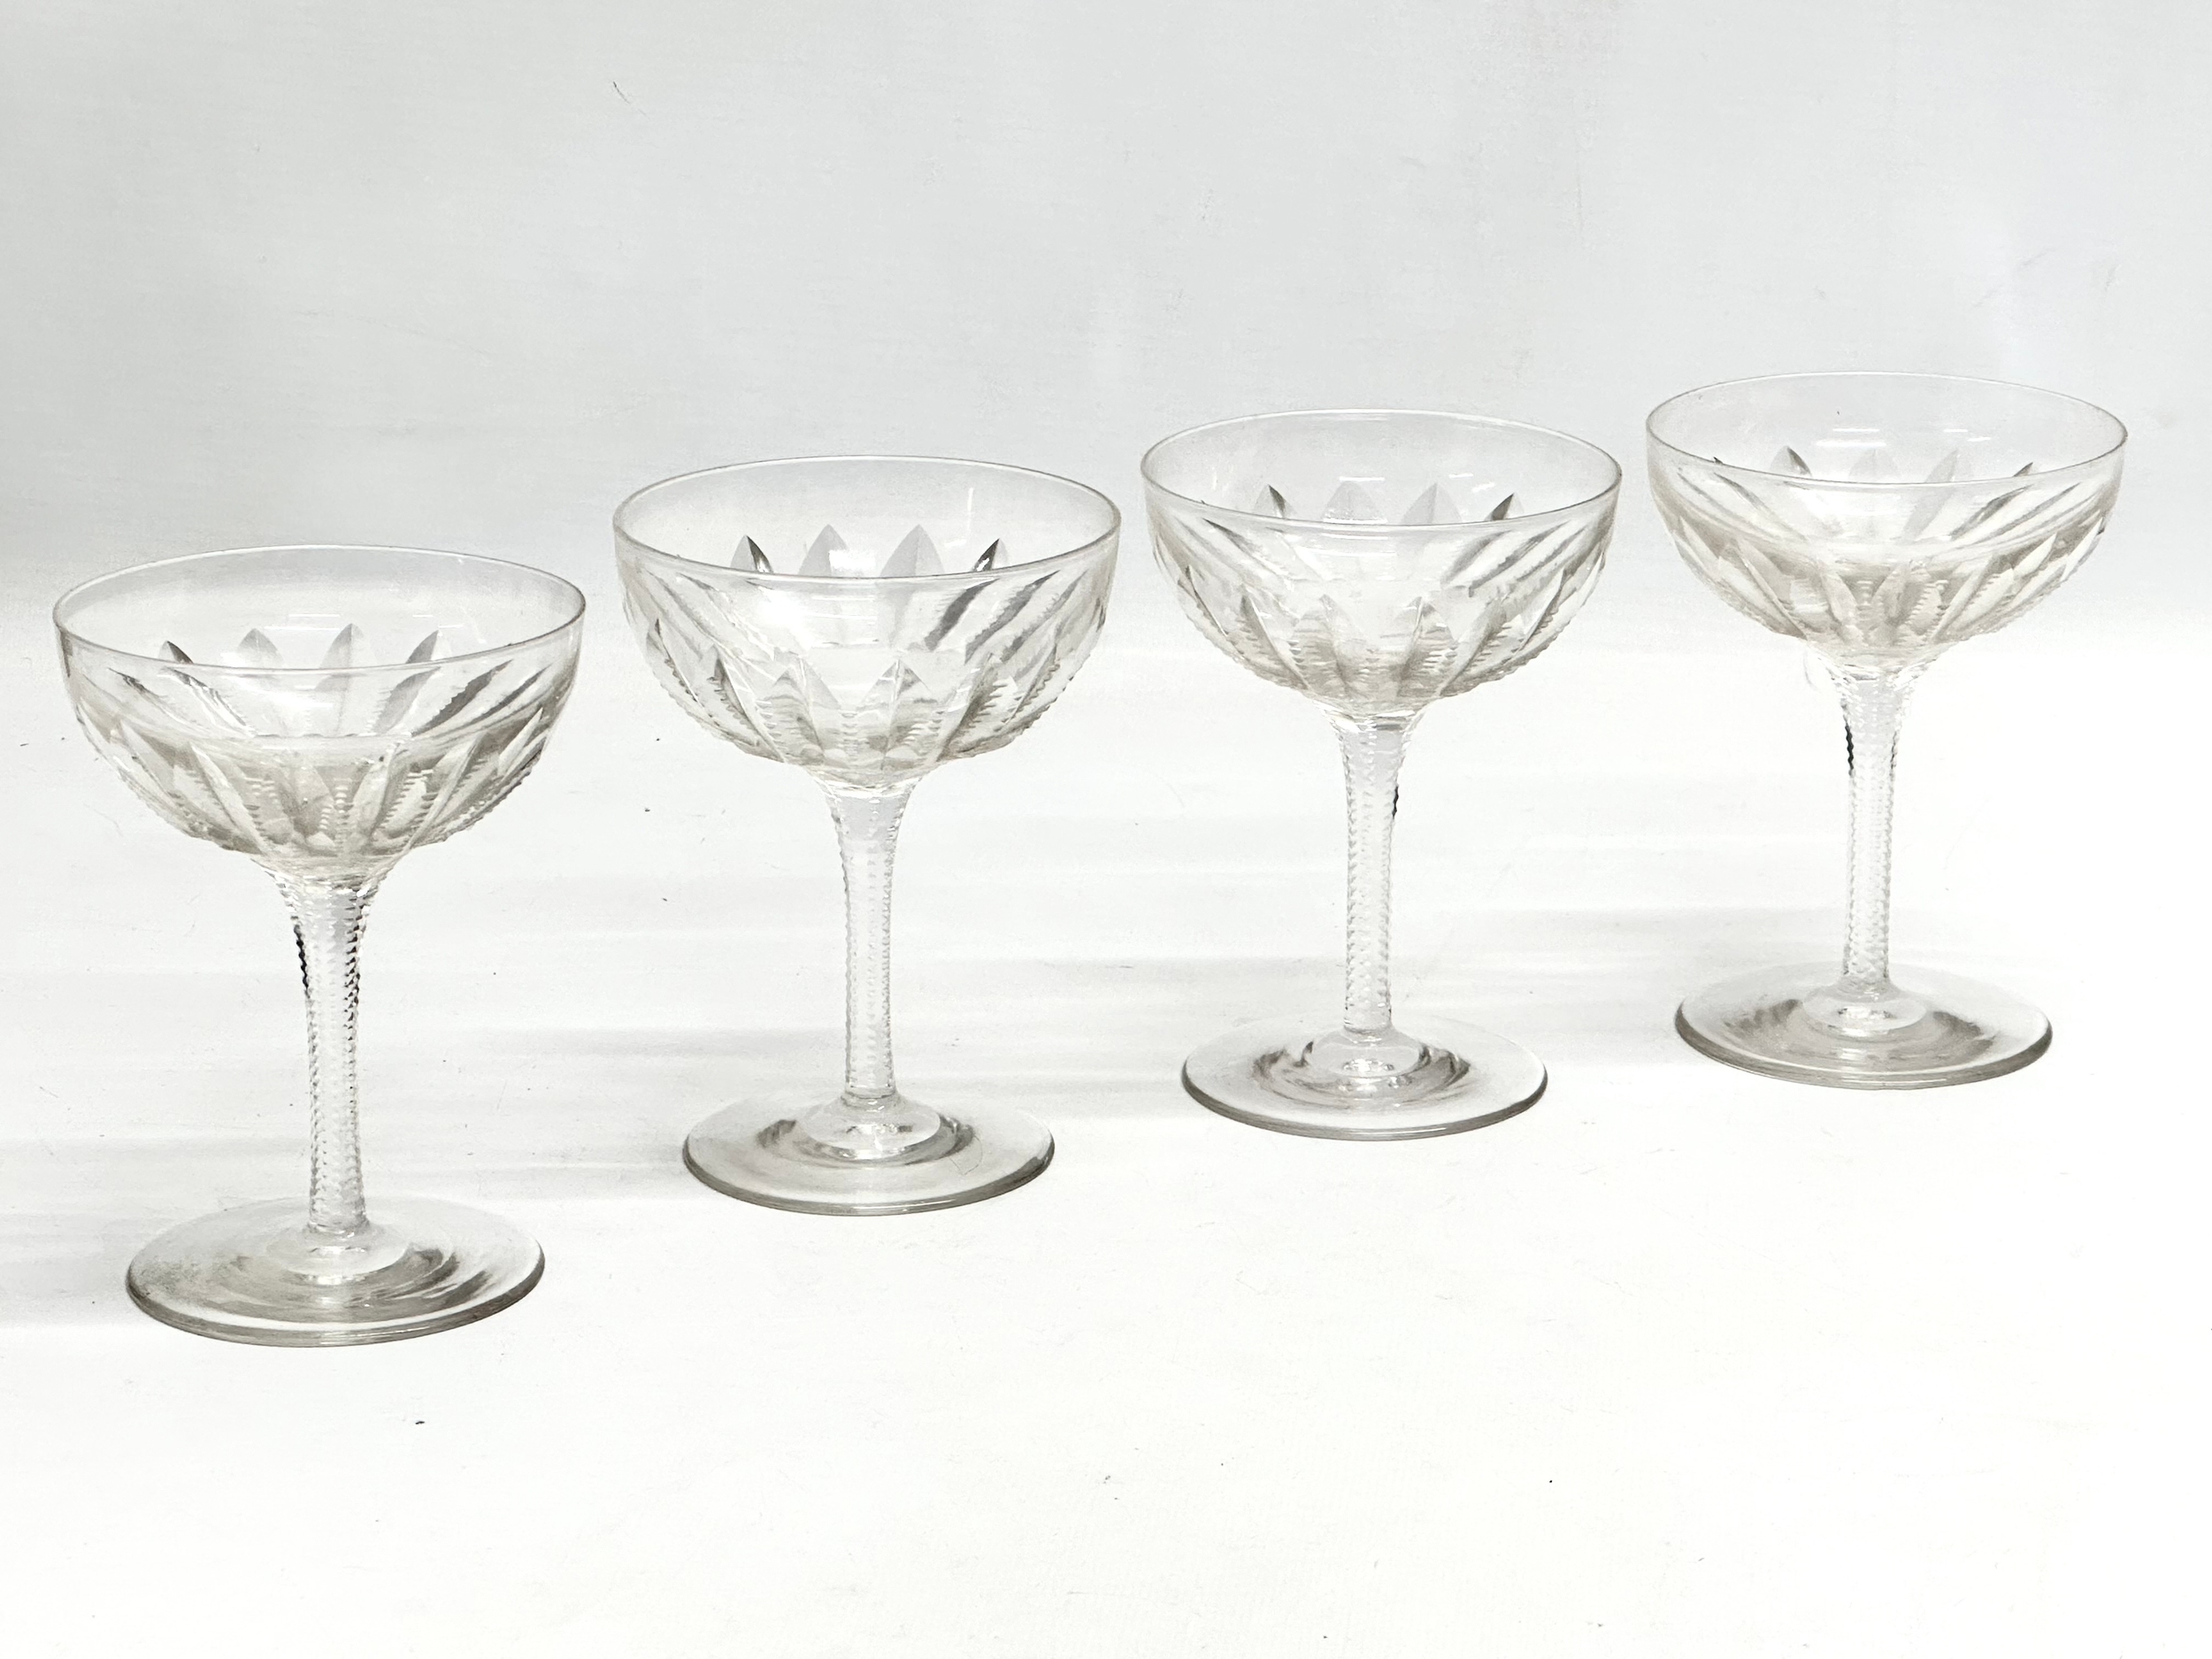 A set of 4 Late 19th/Early 20th Century notch cut cocktail glasses/champagne glasses. 9x12cm